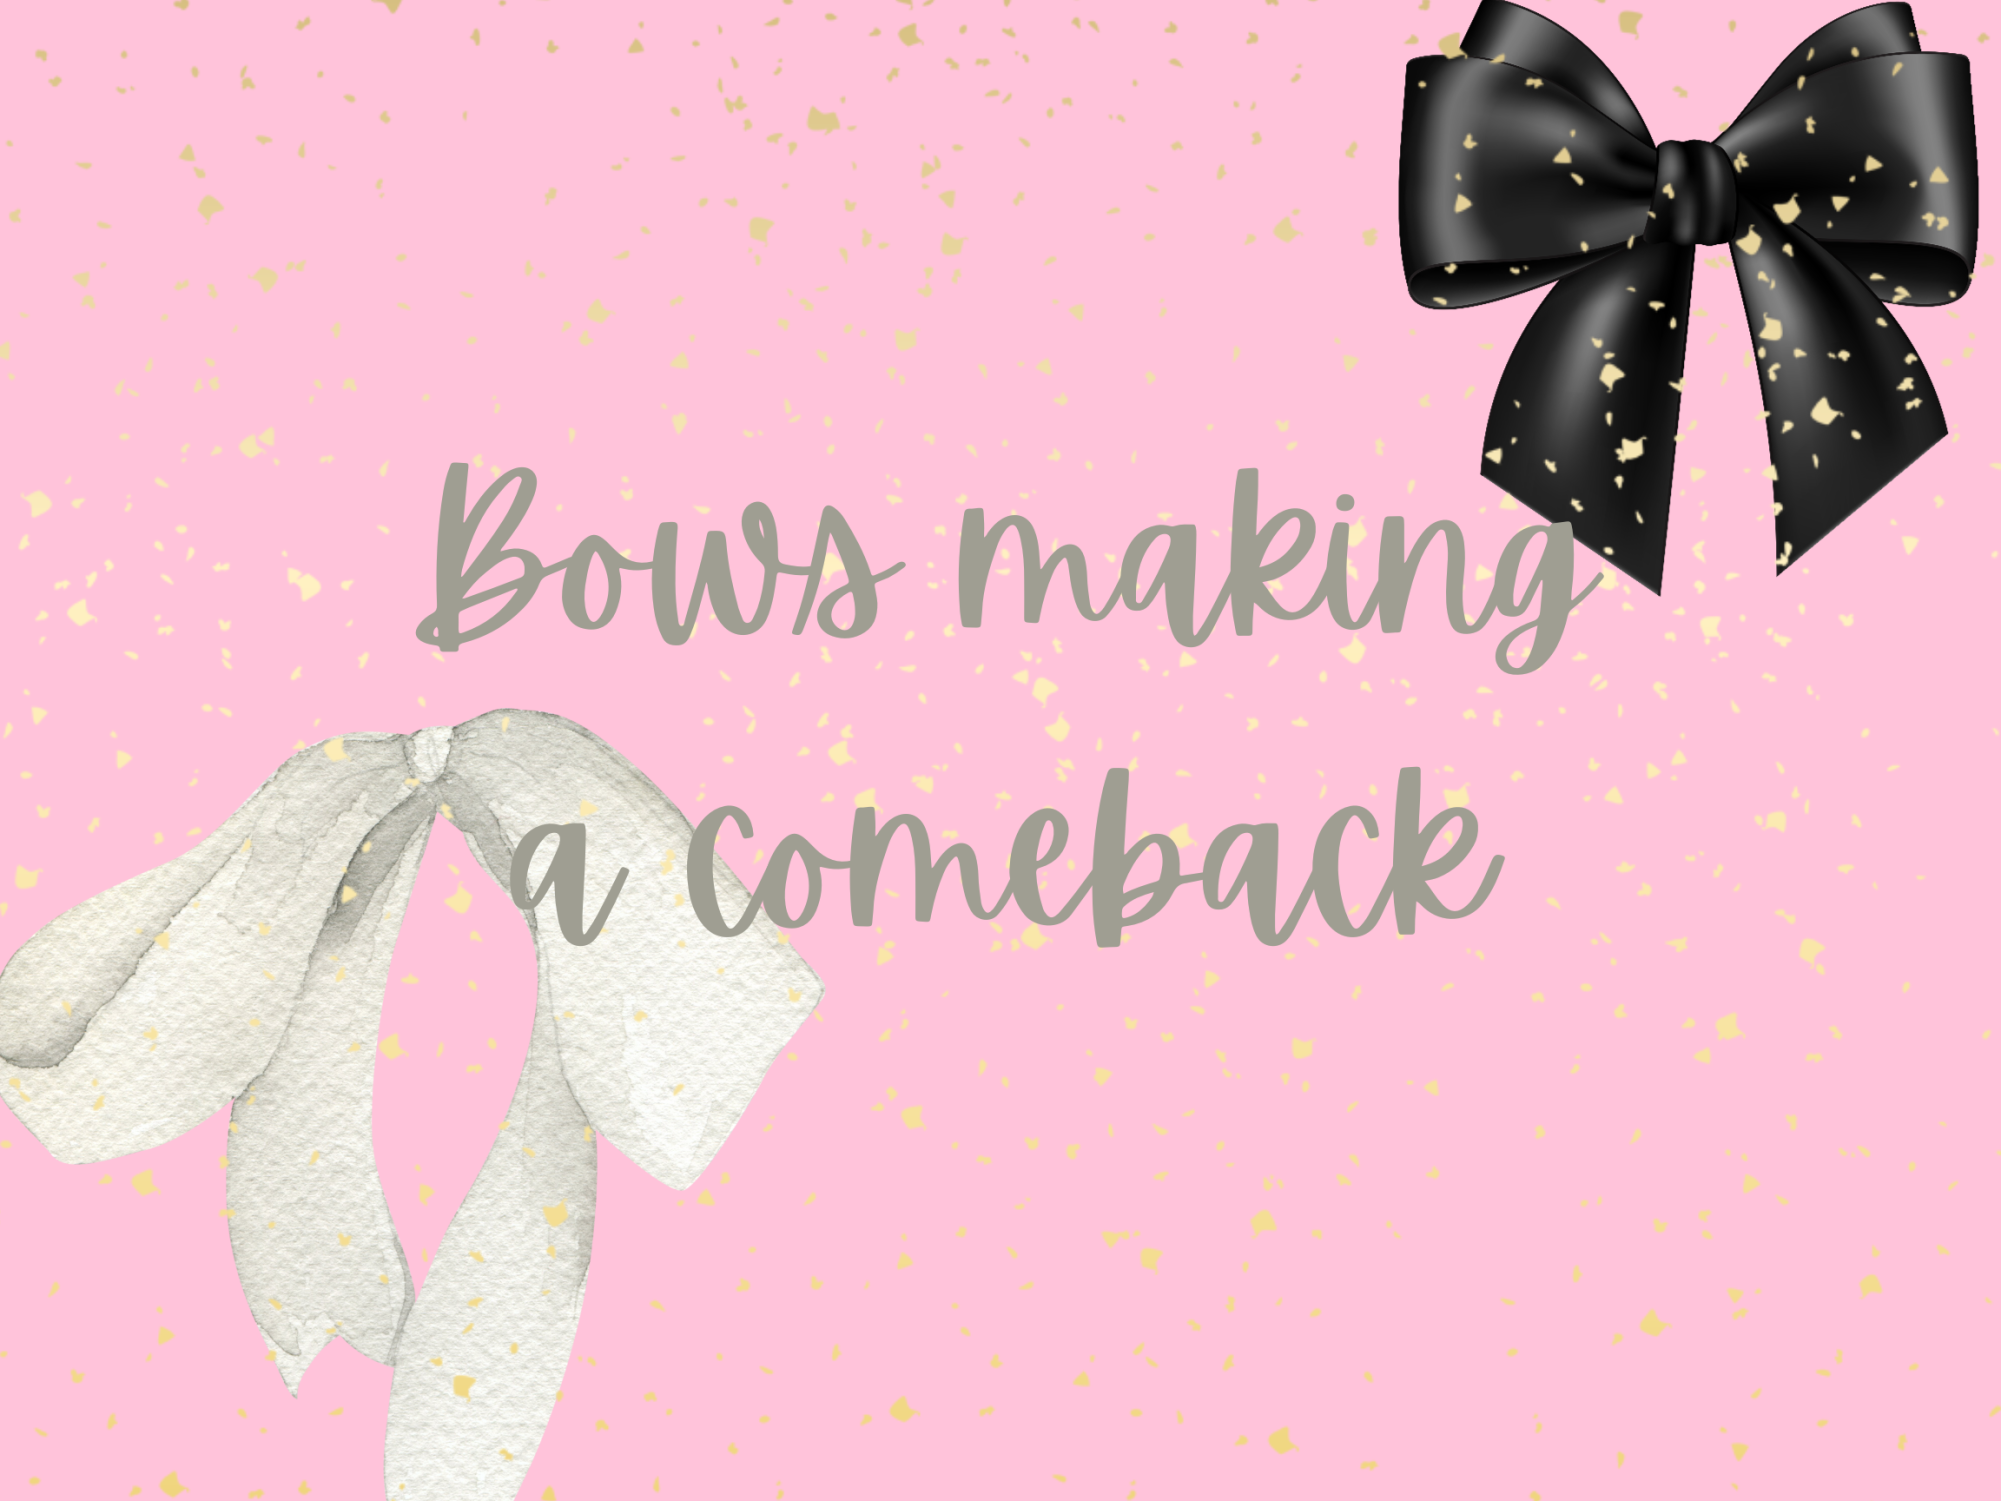 Hair Bows are Back—And This Time, The Adults Are Joining In